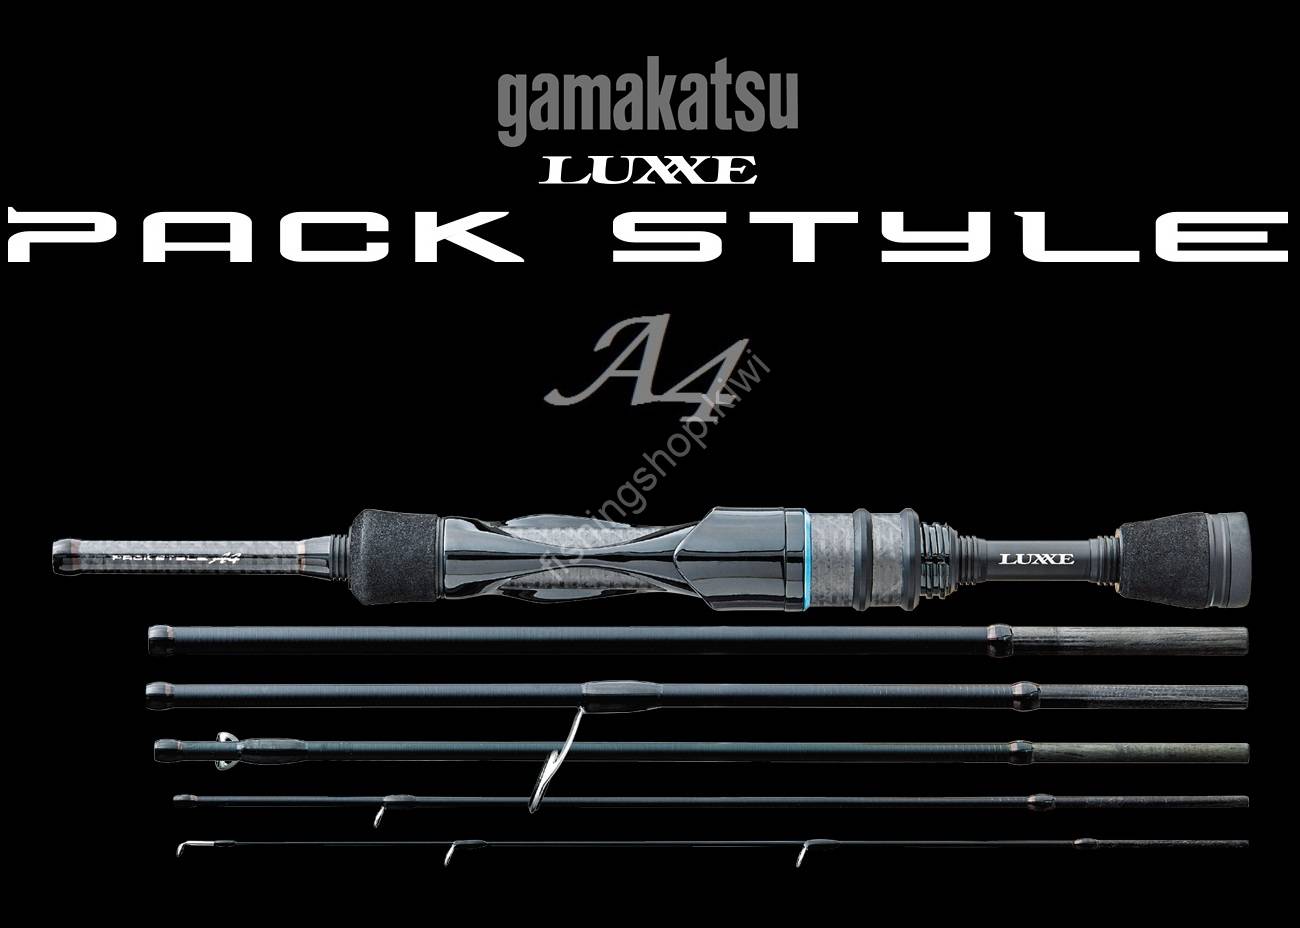 GAMAKATSU Luxxe 24712 Pack Style A4 B60L Rods buy at